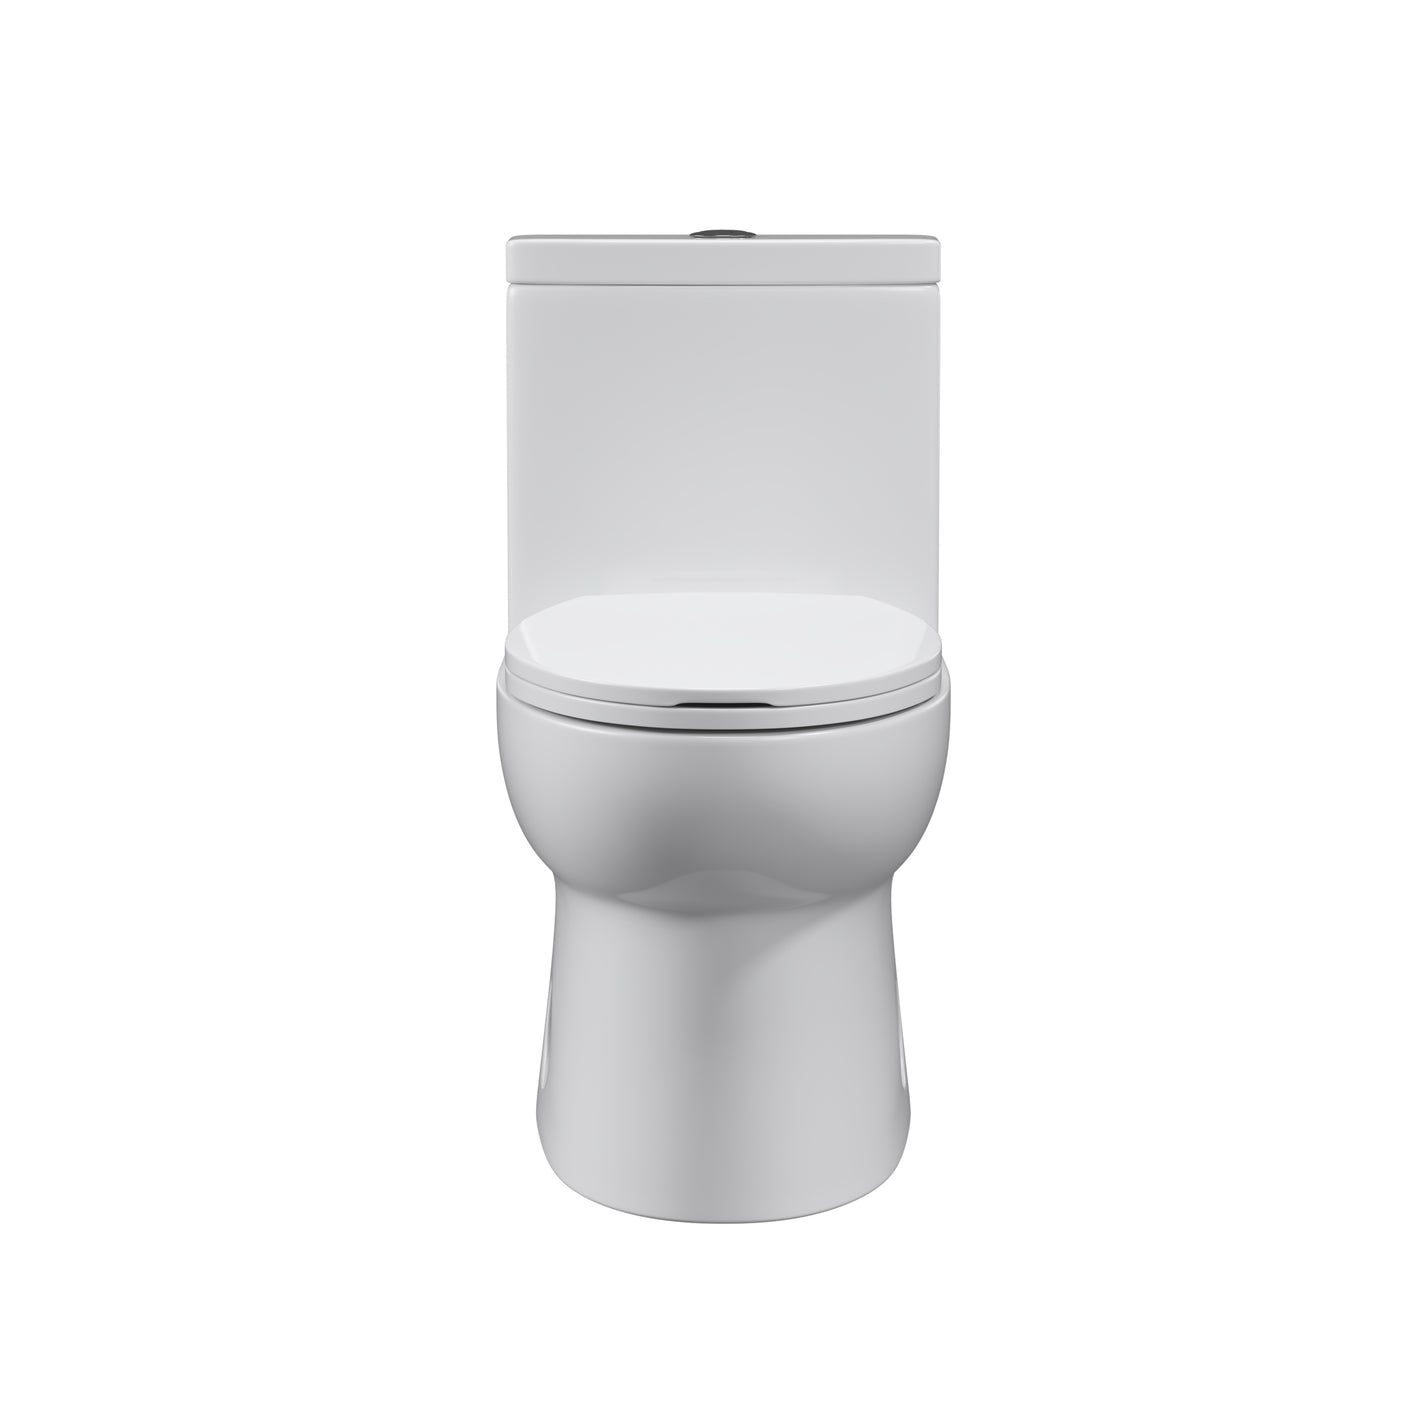 Powerful & Quiet Dual Flush Modern One Piece Toilet with Soft Closing Seat